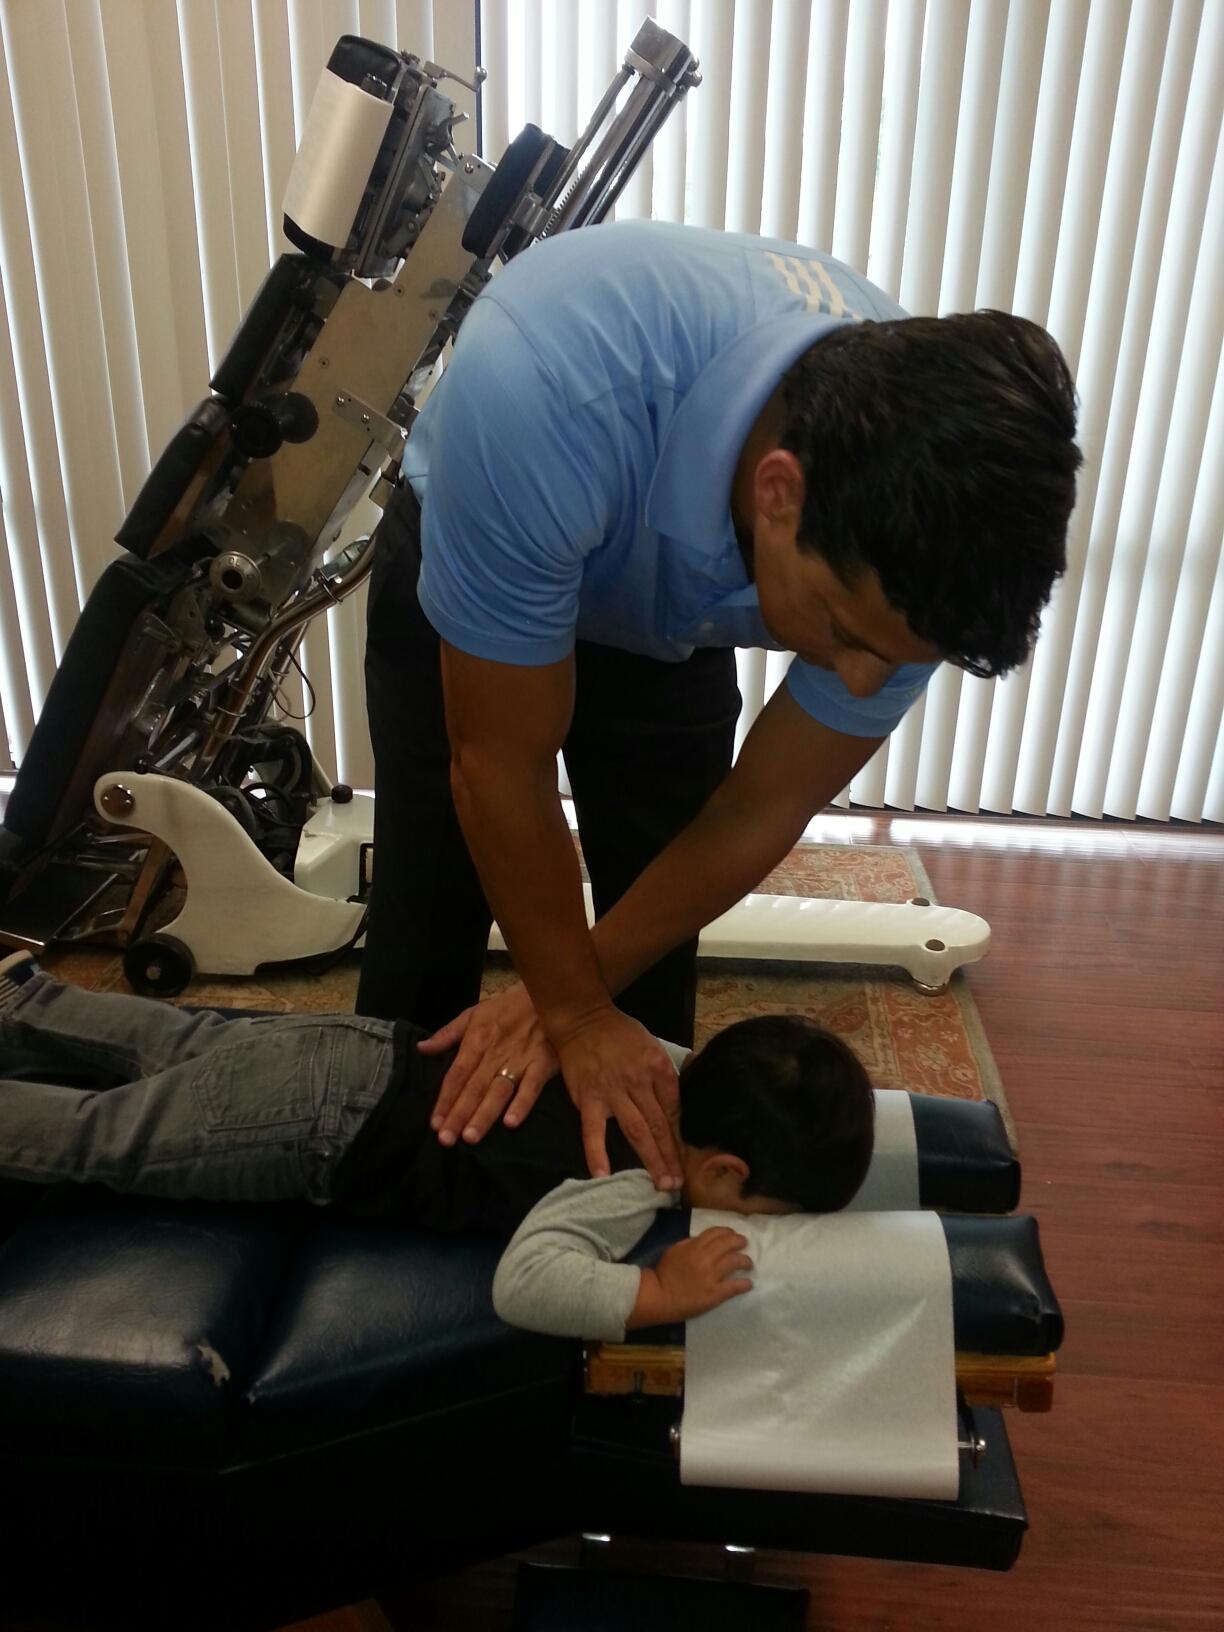 Chiropractic Care!